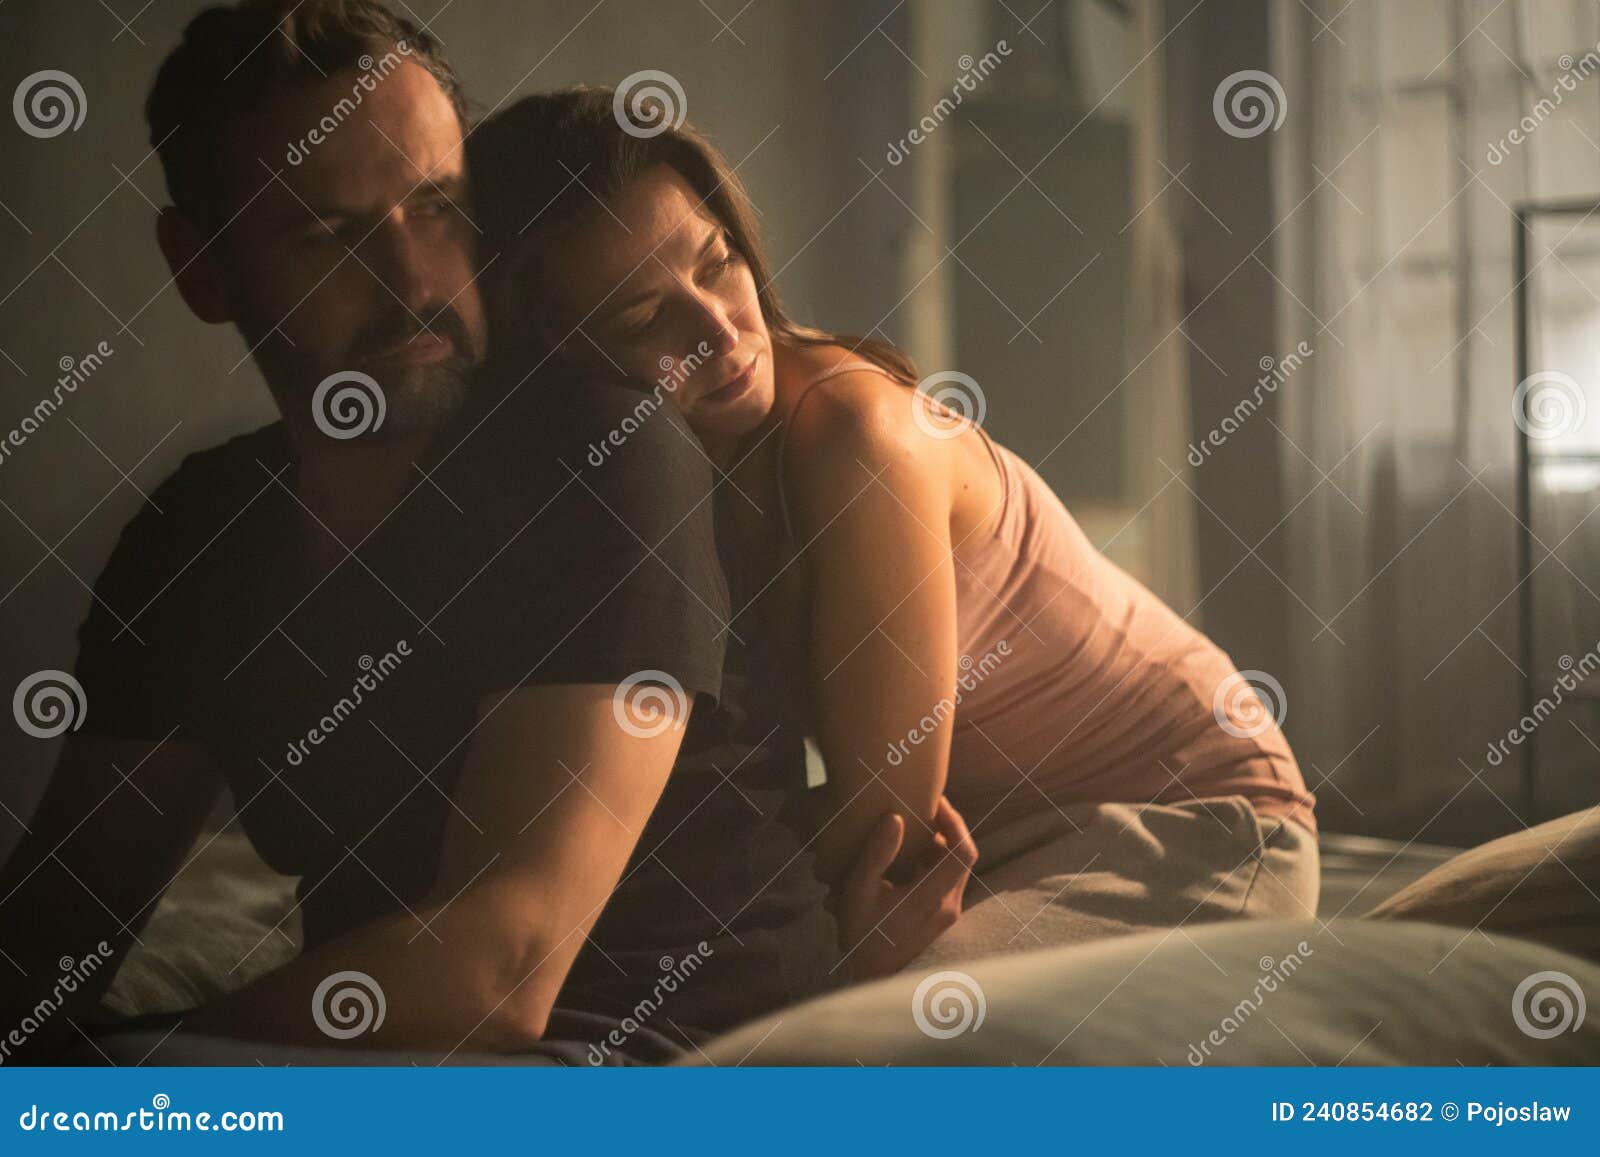 Sad Mature Man is Looking Down, Thinking about Cheating His Wife, while His Wife is Snuggling To Him Stock Photo